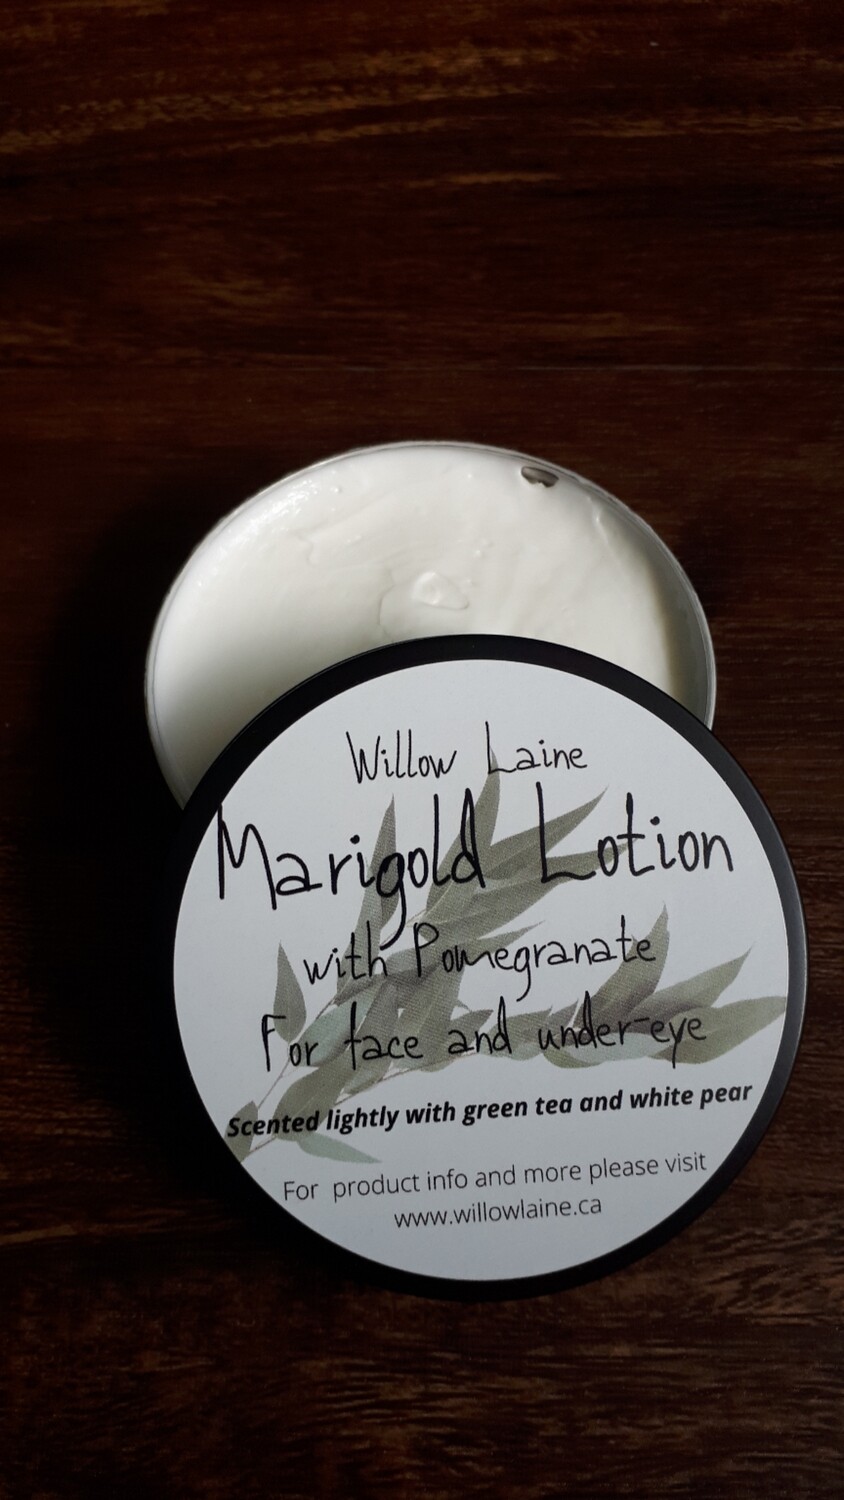 Marigold under-eye and face cream with Pomegranate